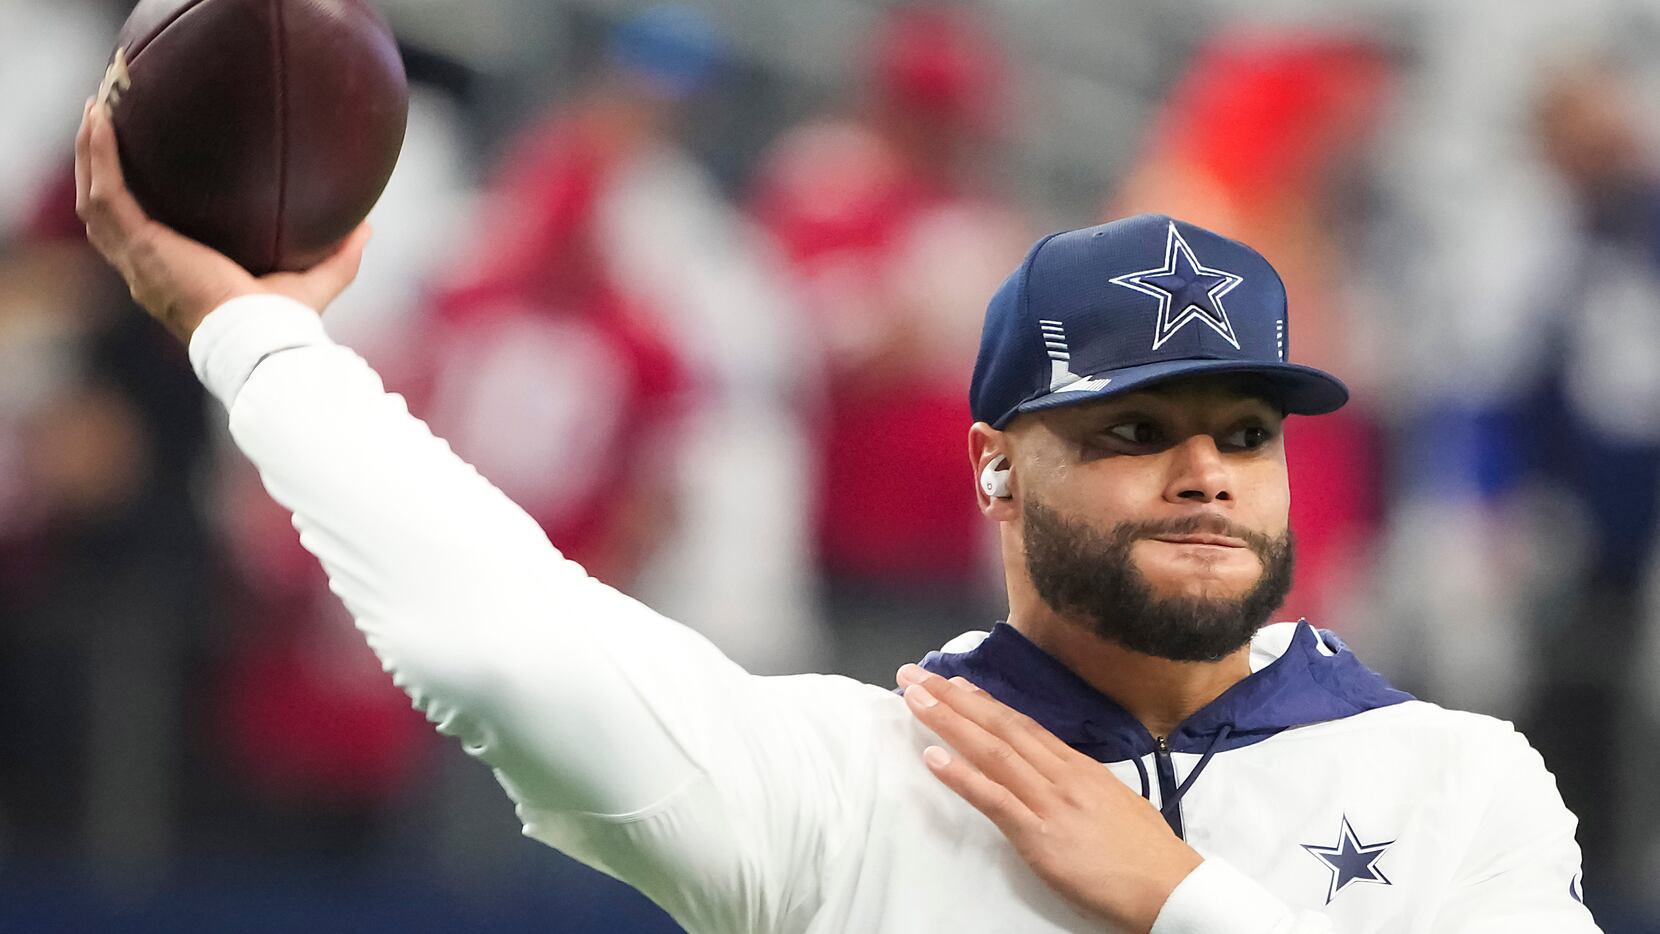 Dak Prescott stops by Las Colinas restaurant to talk shop, pick up $20k  check for charity